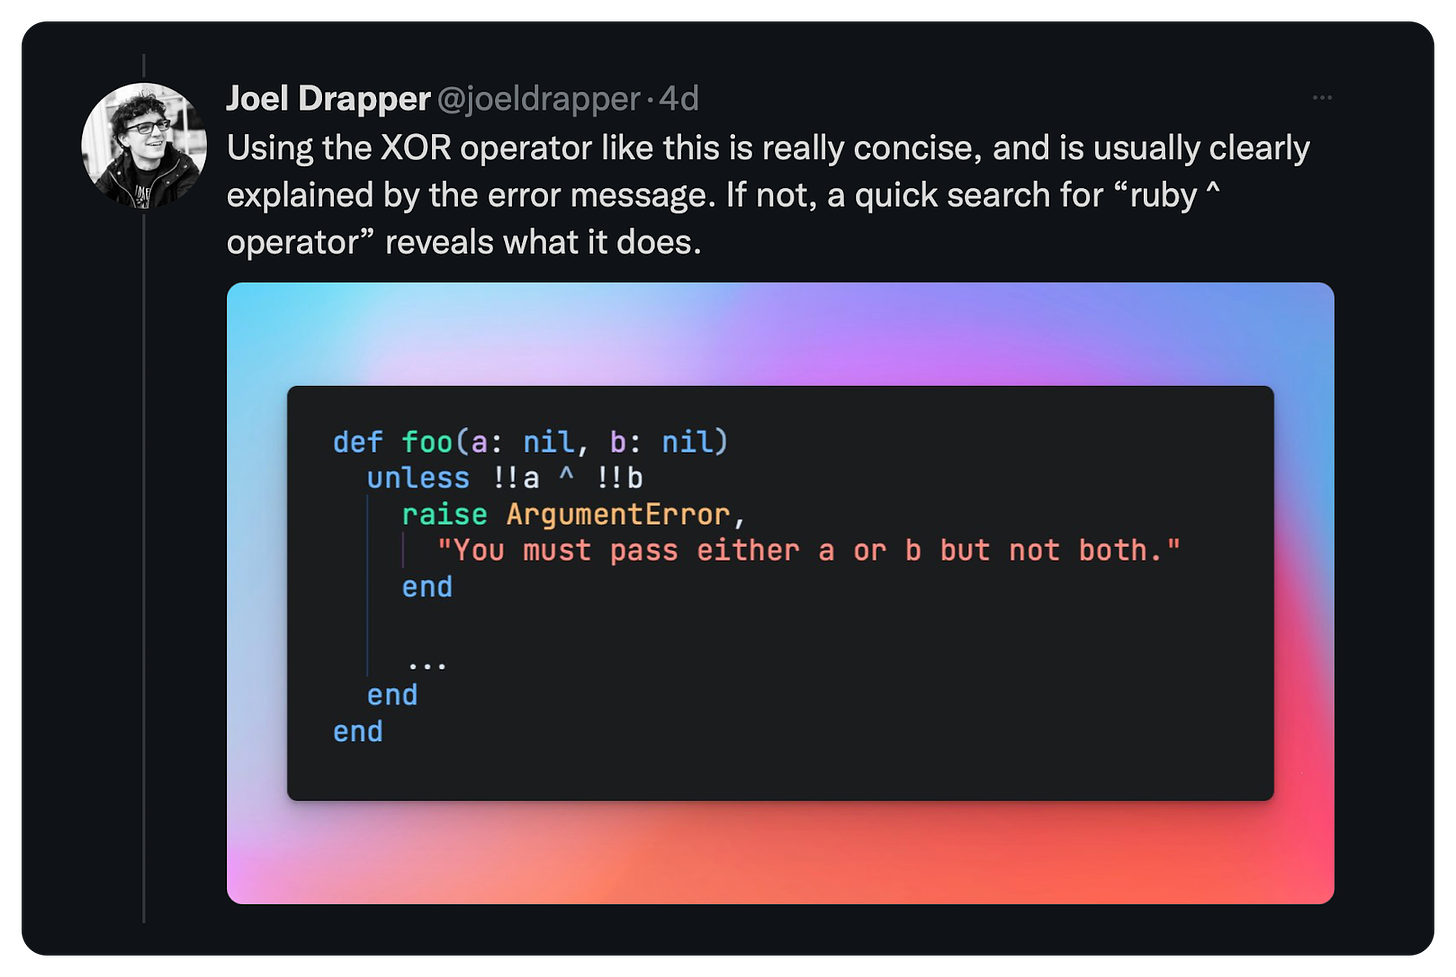 Using the XOR operator like this is really concise, and is usually clearly explained by the error message. If not, a quick search for “ruby ^ operator” reveals what it does.